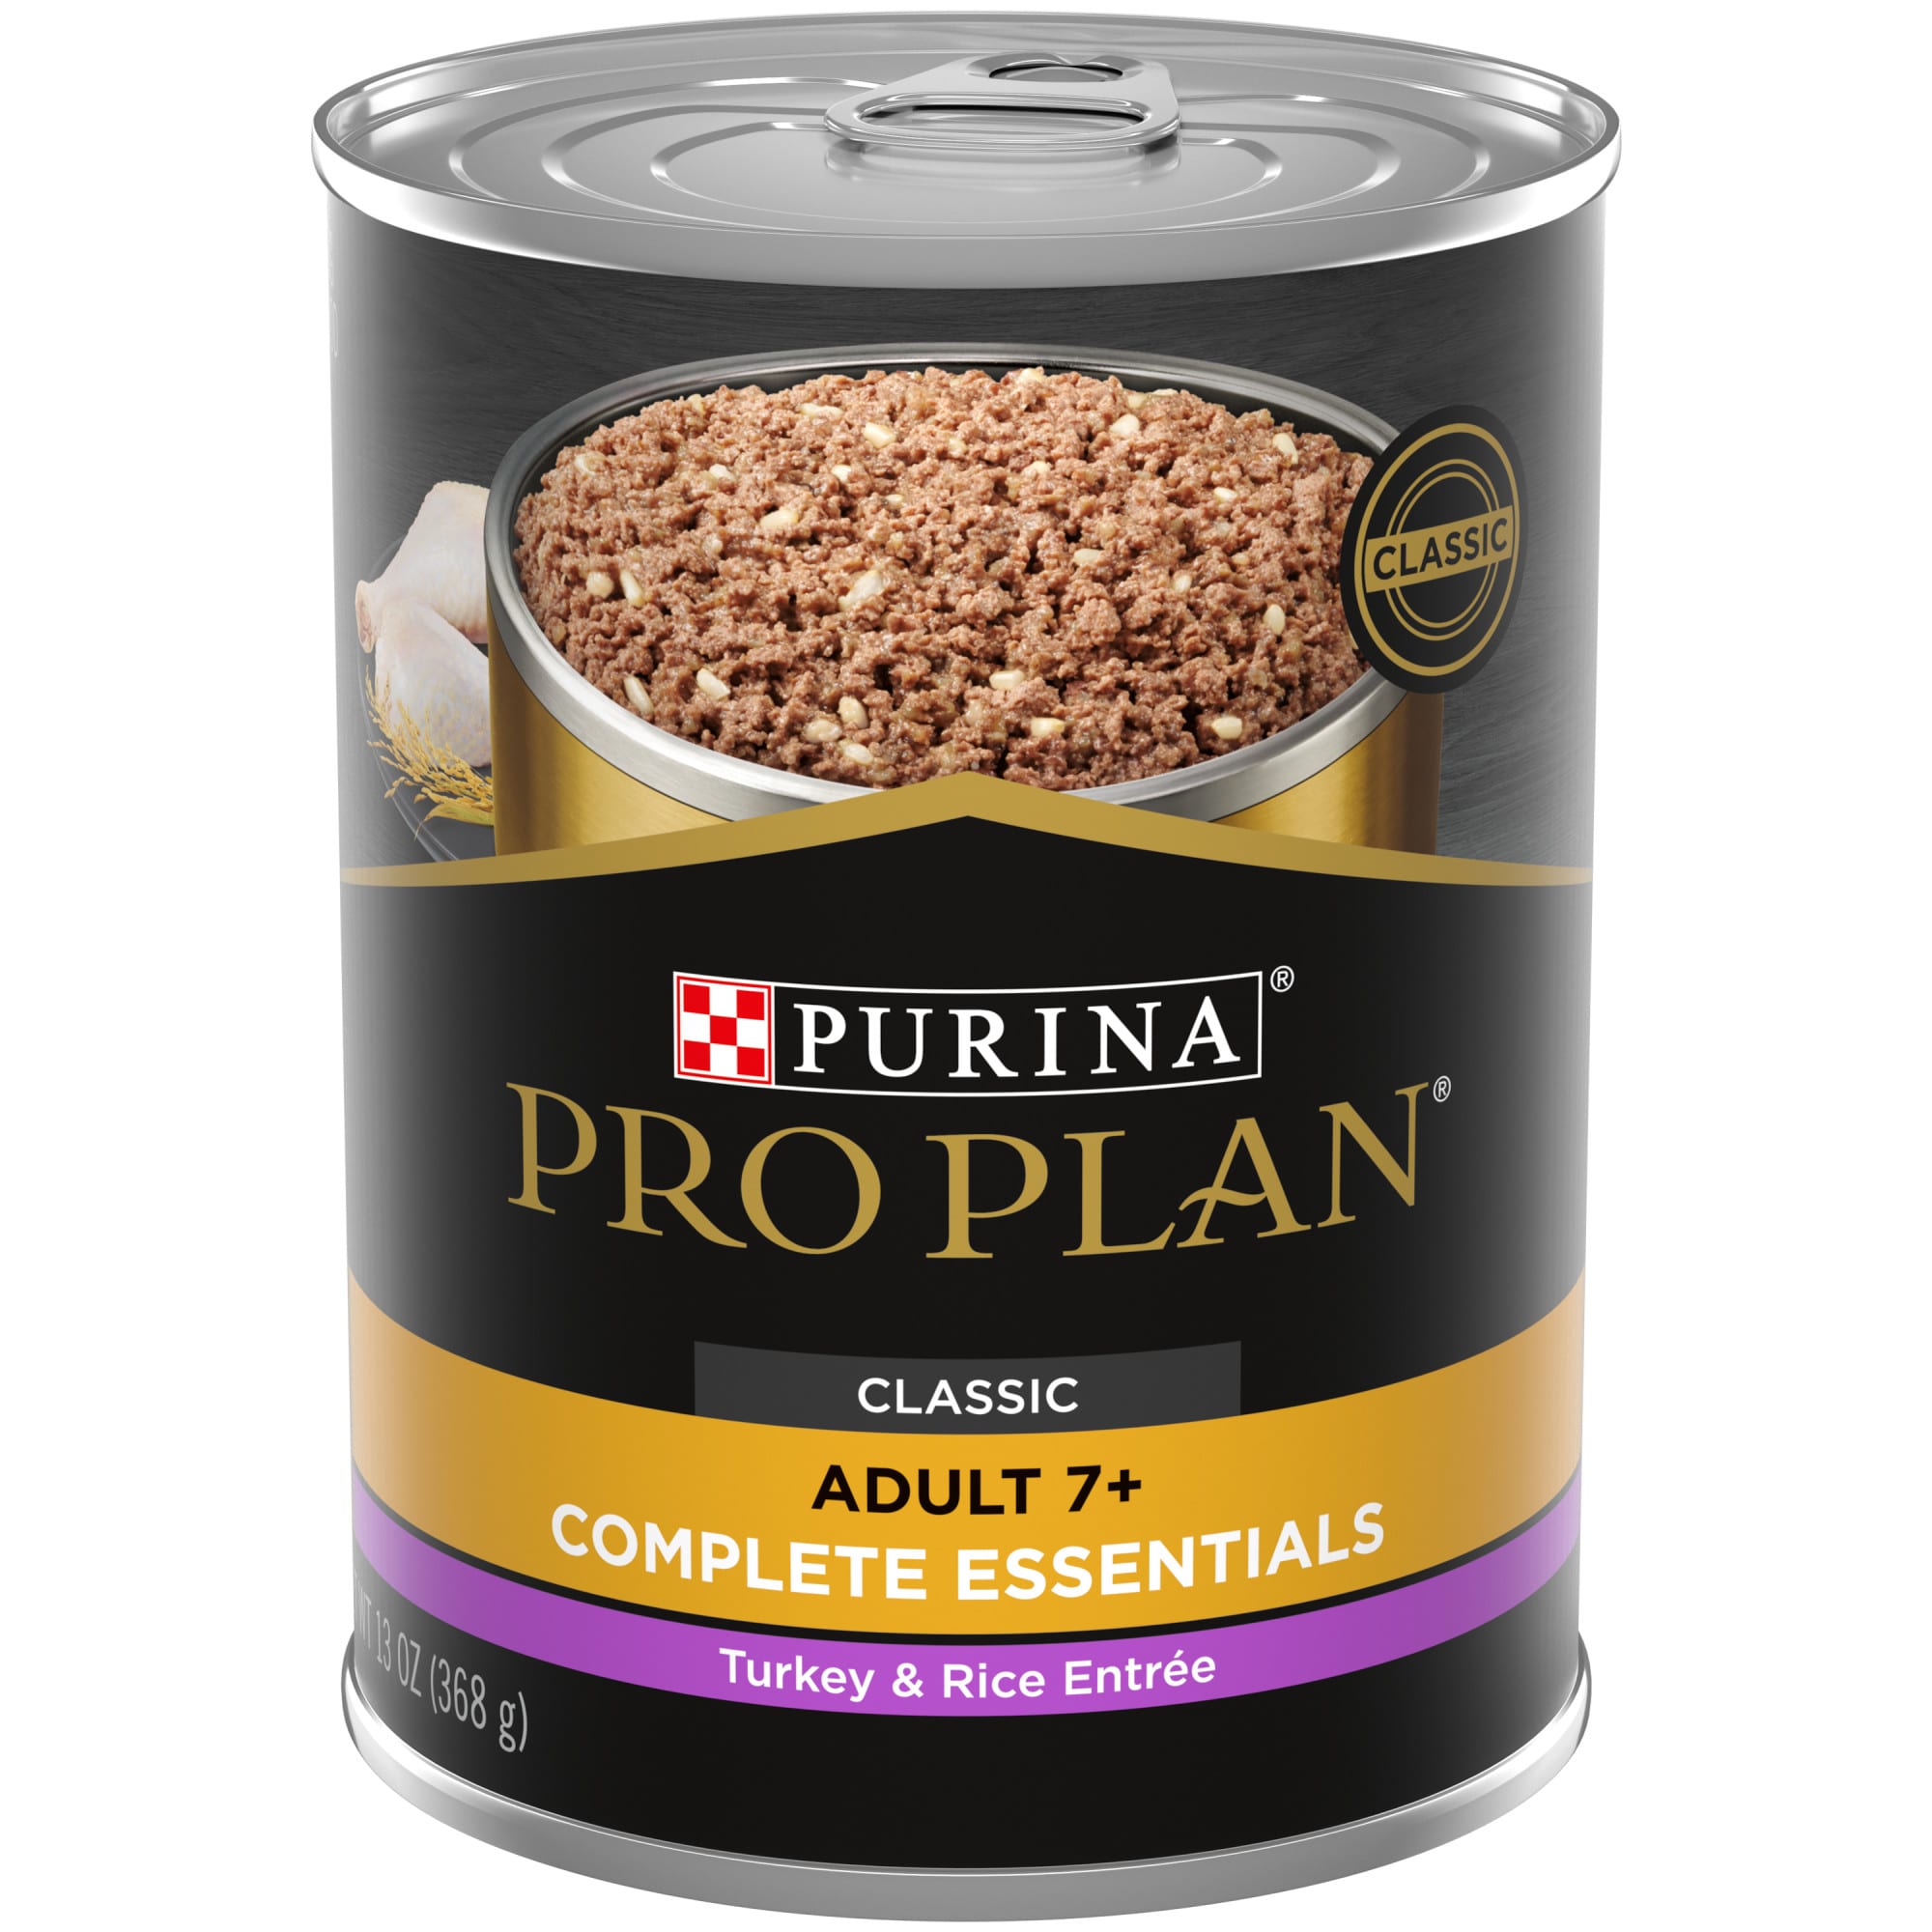 Purina Pro Plan Classic Adult 7+ Complete Essentials Rice Entree Wet Dog Food, 13 oz., Case of | Petco